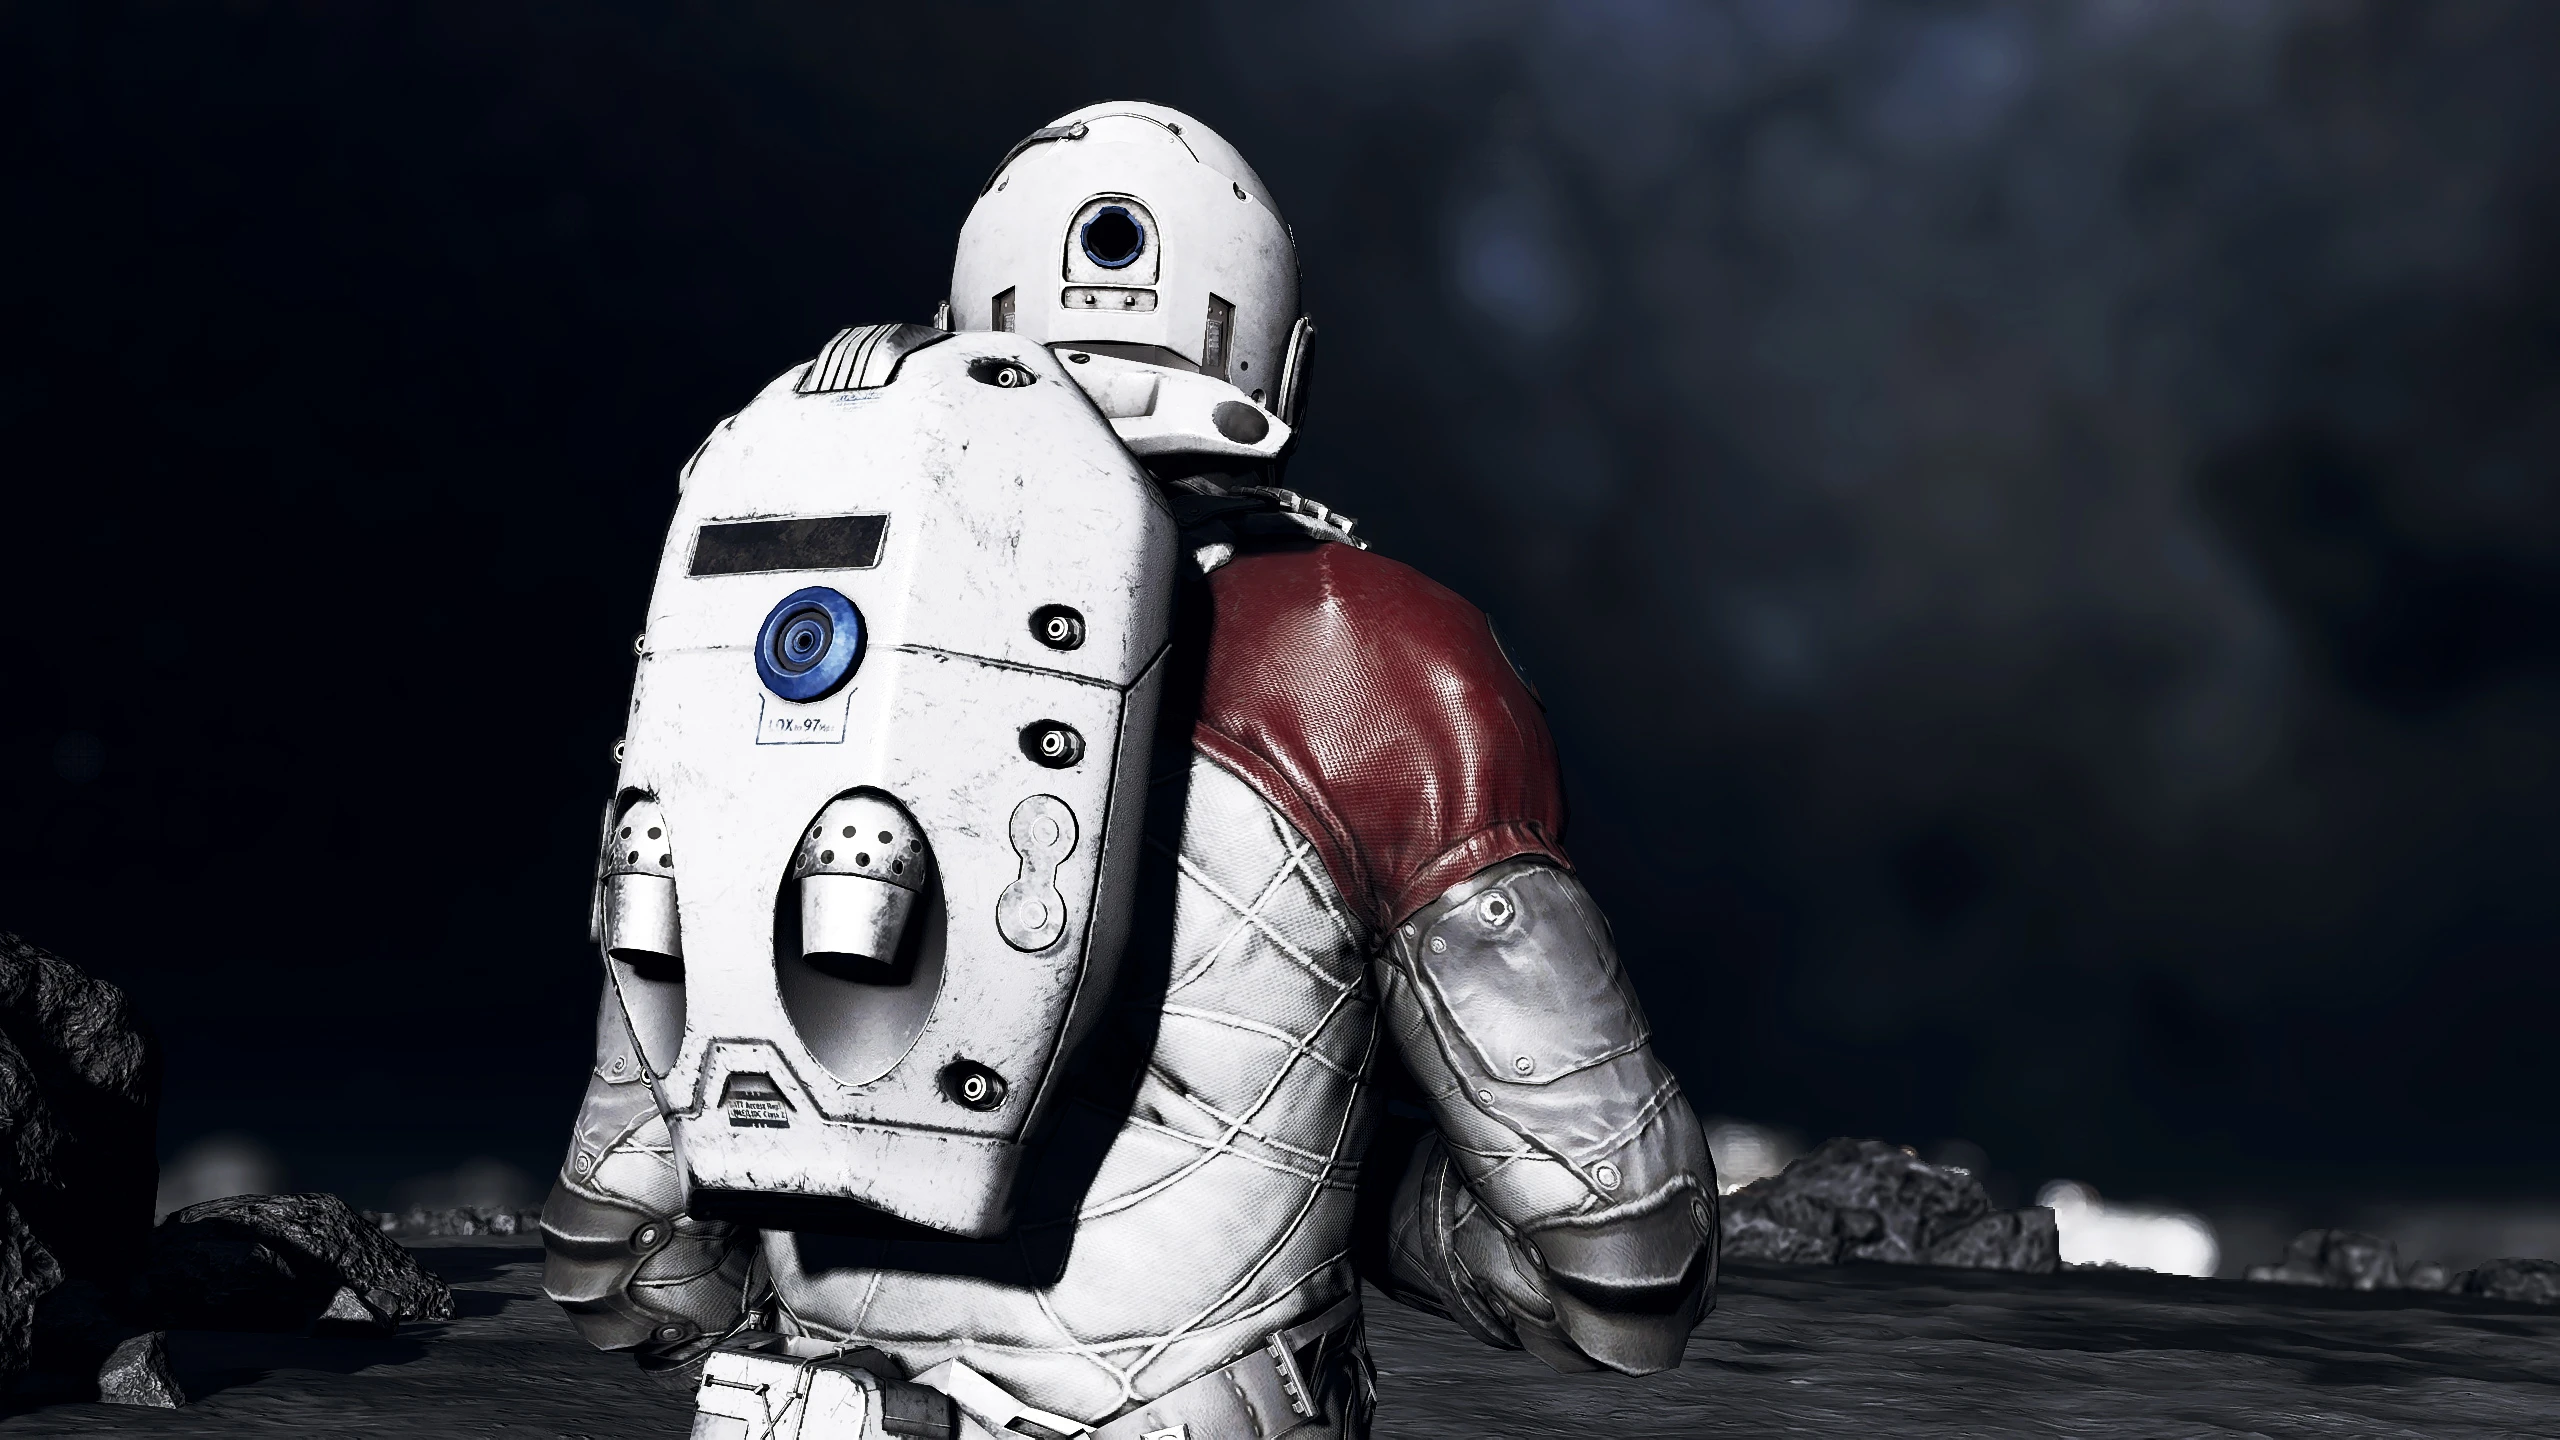 Mantis Spacesuit - My Mark 1 Spacesuit replacer by Xtudo at Starfield ...